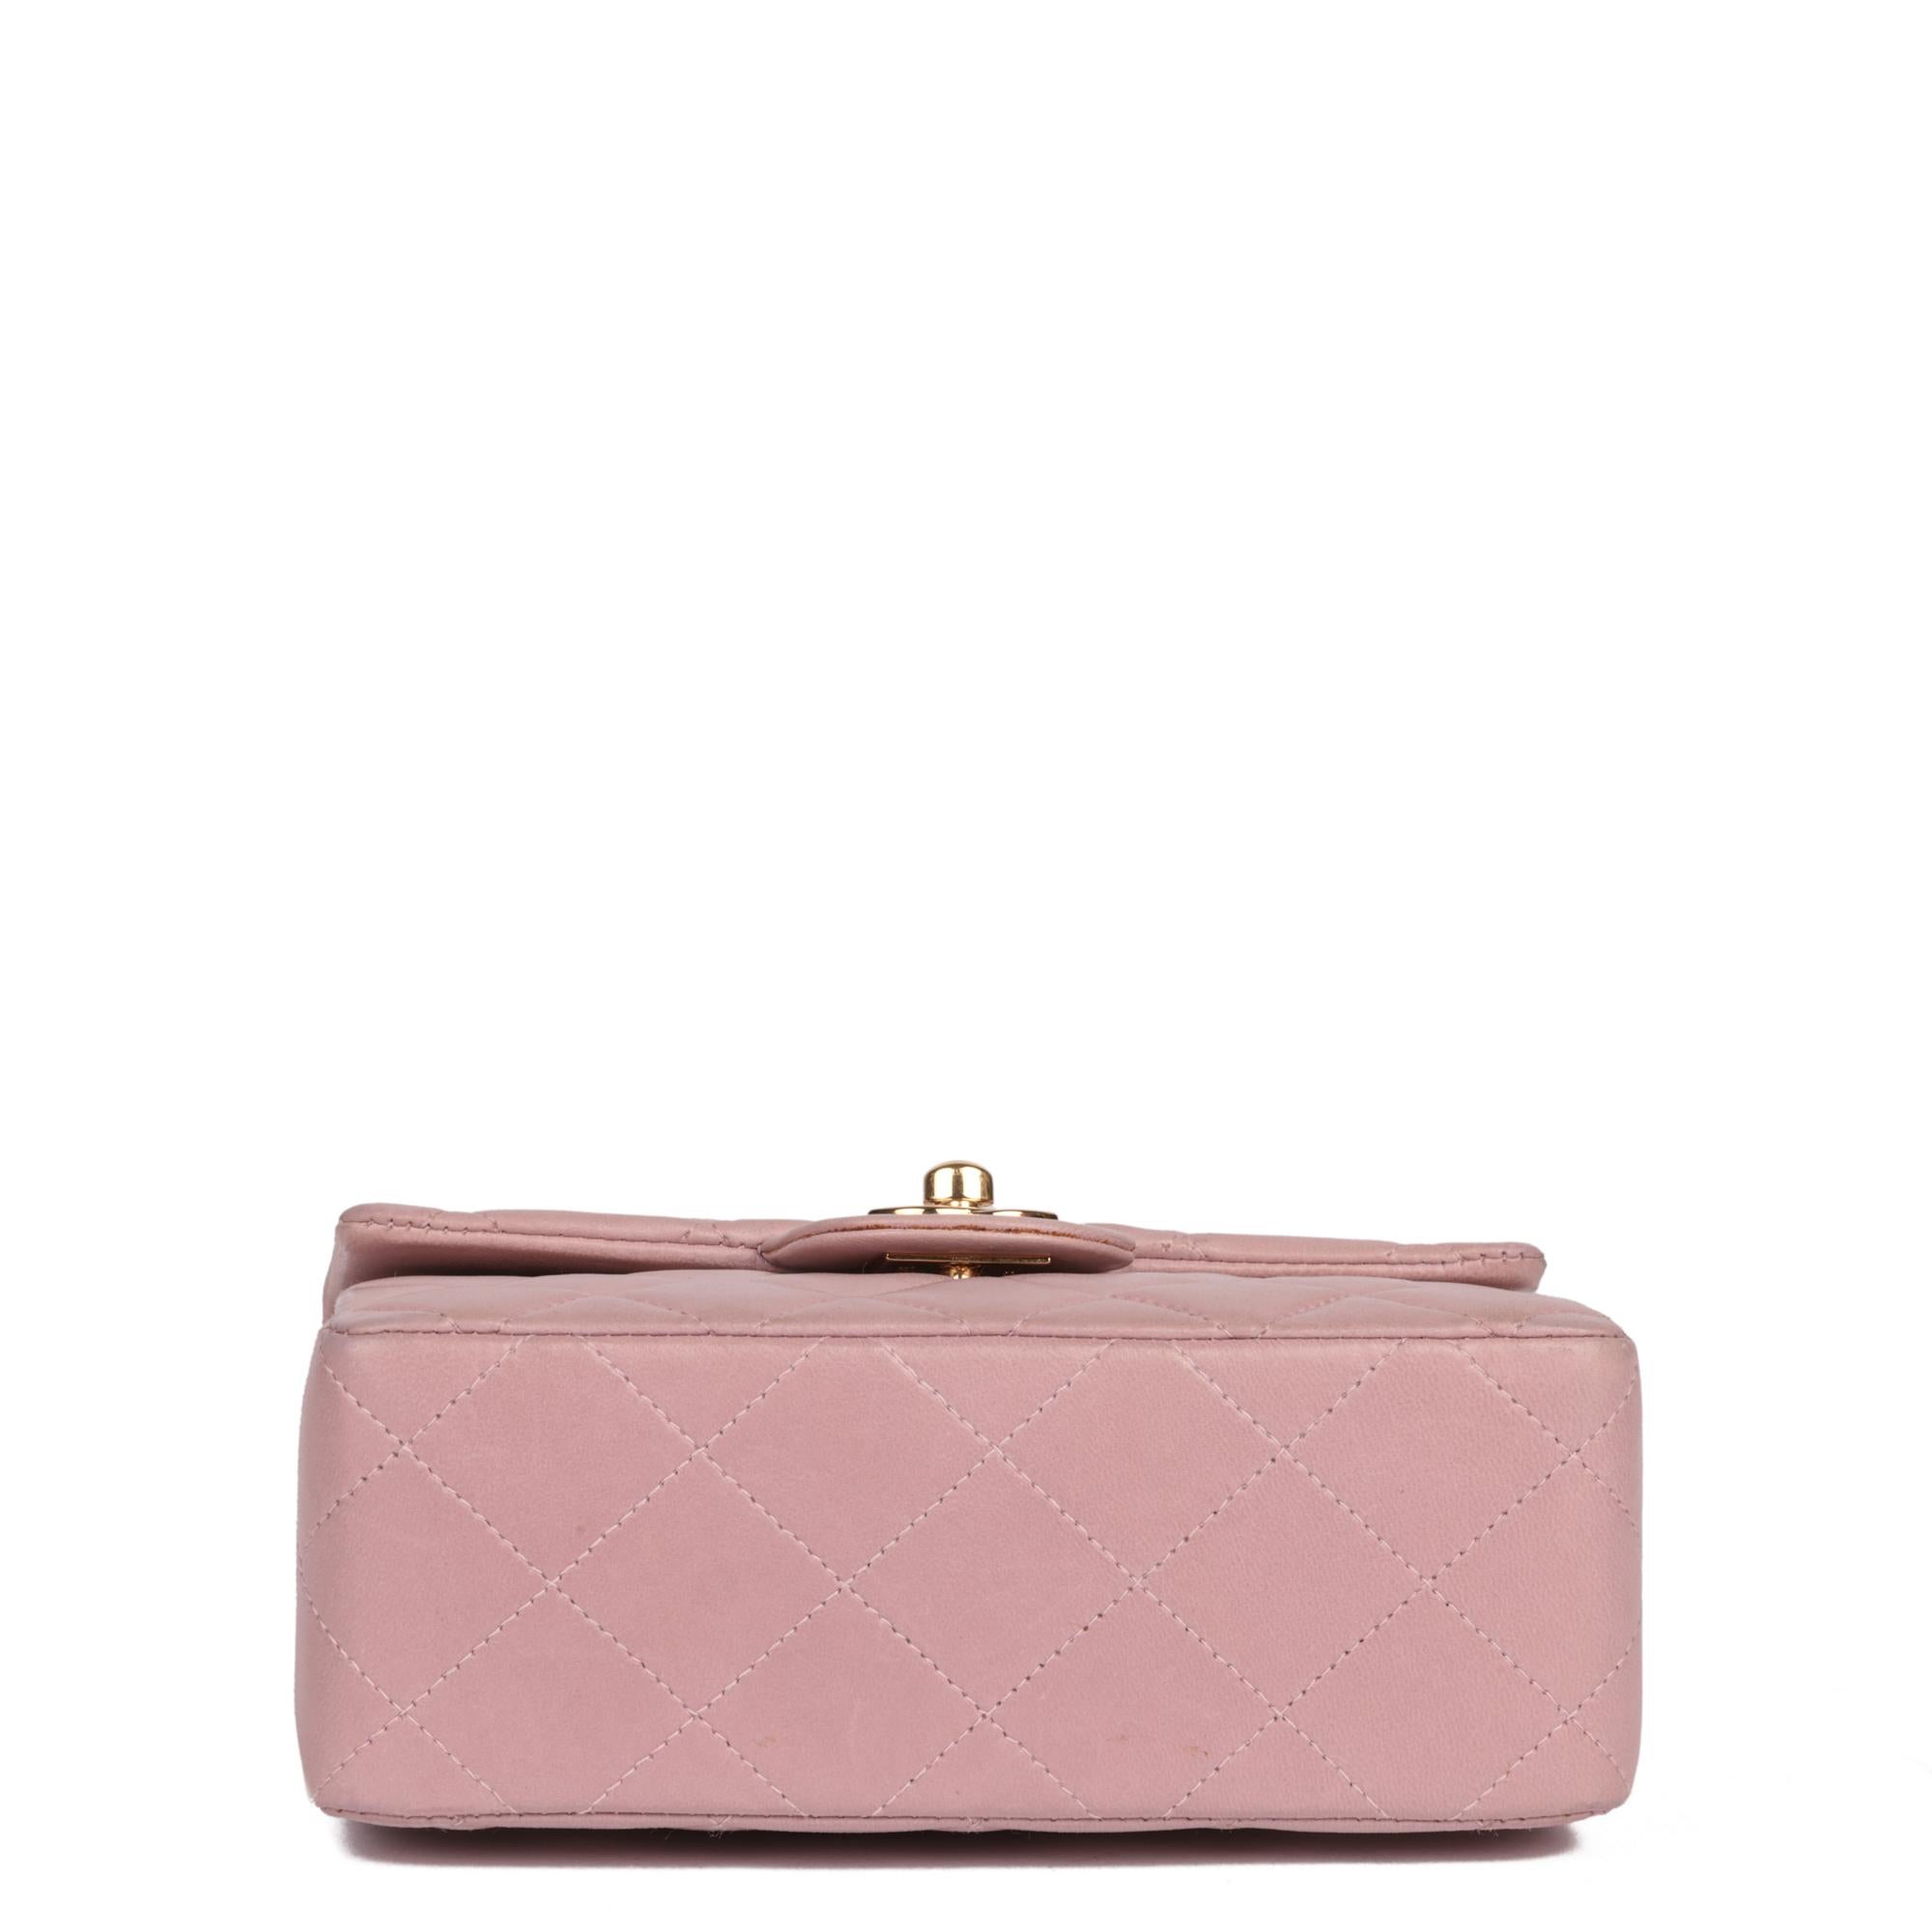 CHANEL Pink Quilted Lambskin Vintage Square Mini Flap Bag In Excellent Condition For Sale In Bishop's Stortford, Hertfordshire